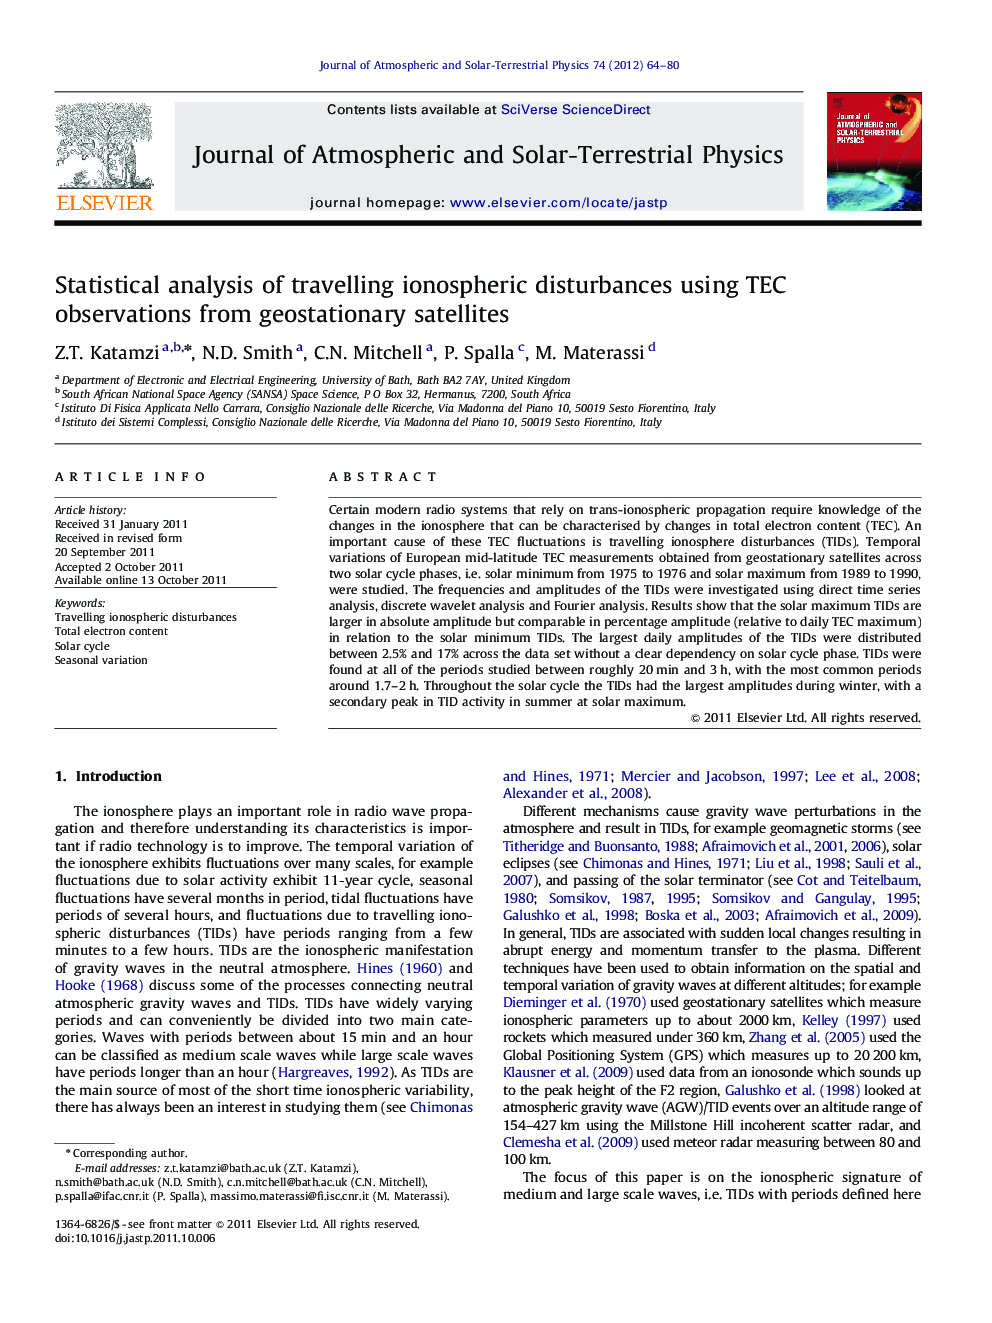 Statistical analysis of travelling ionospheric disturbances using TEC observations from geostationary satellites